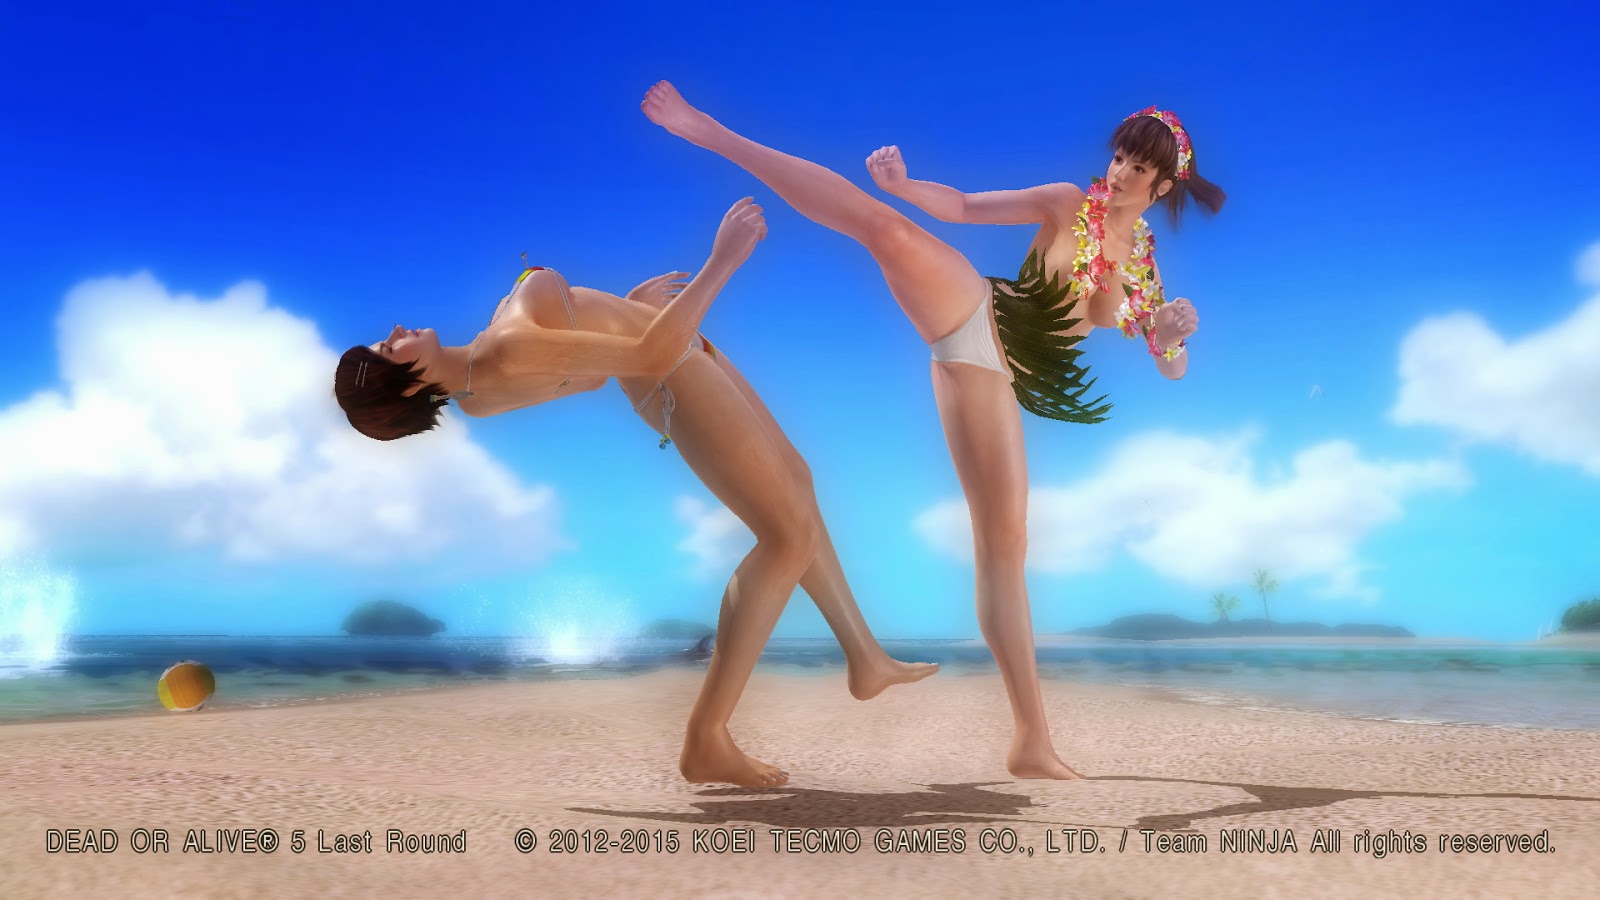 Dead or Alive 5 and sexism